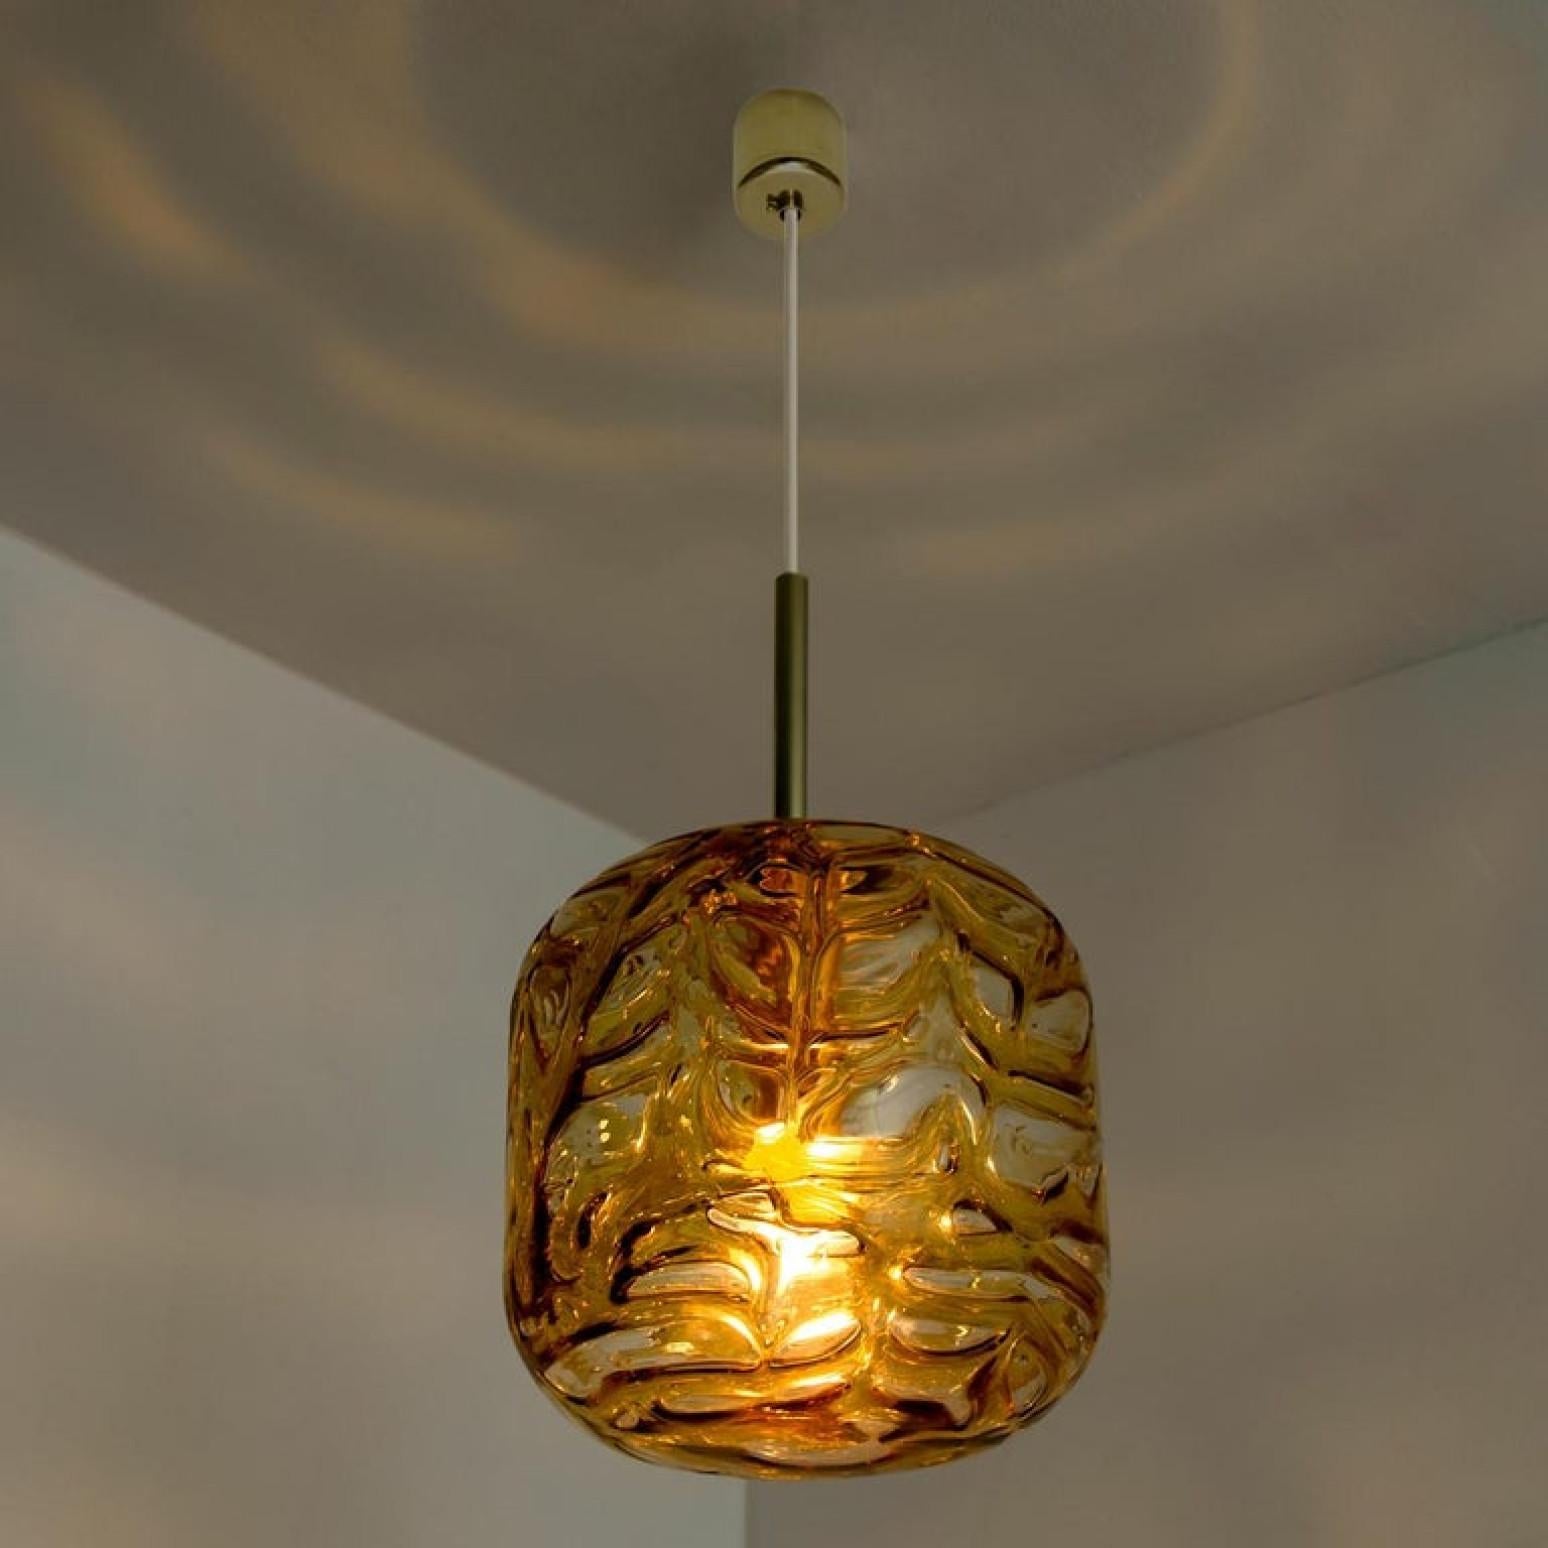 Exceptional Pair of Amber Murano Glass Pendant Lights Venini Style, 1970 For Sale 11